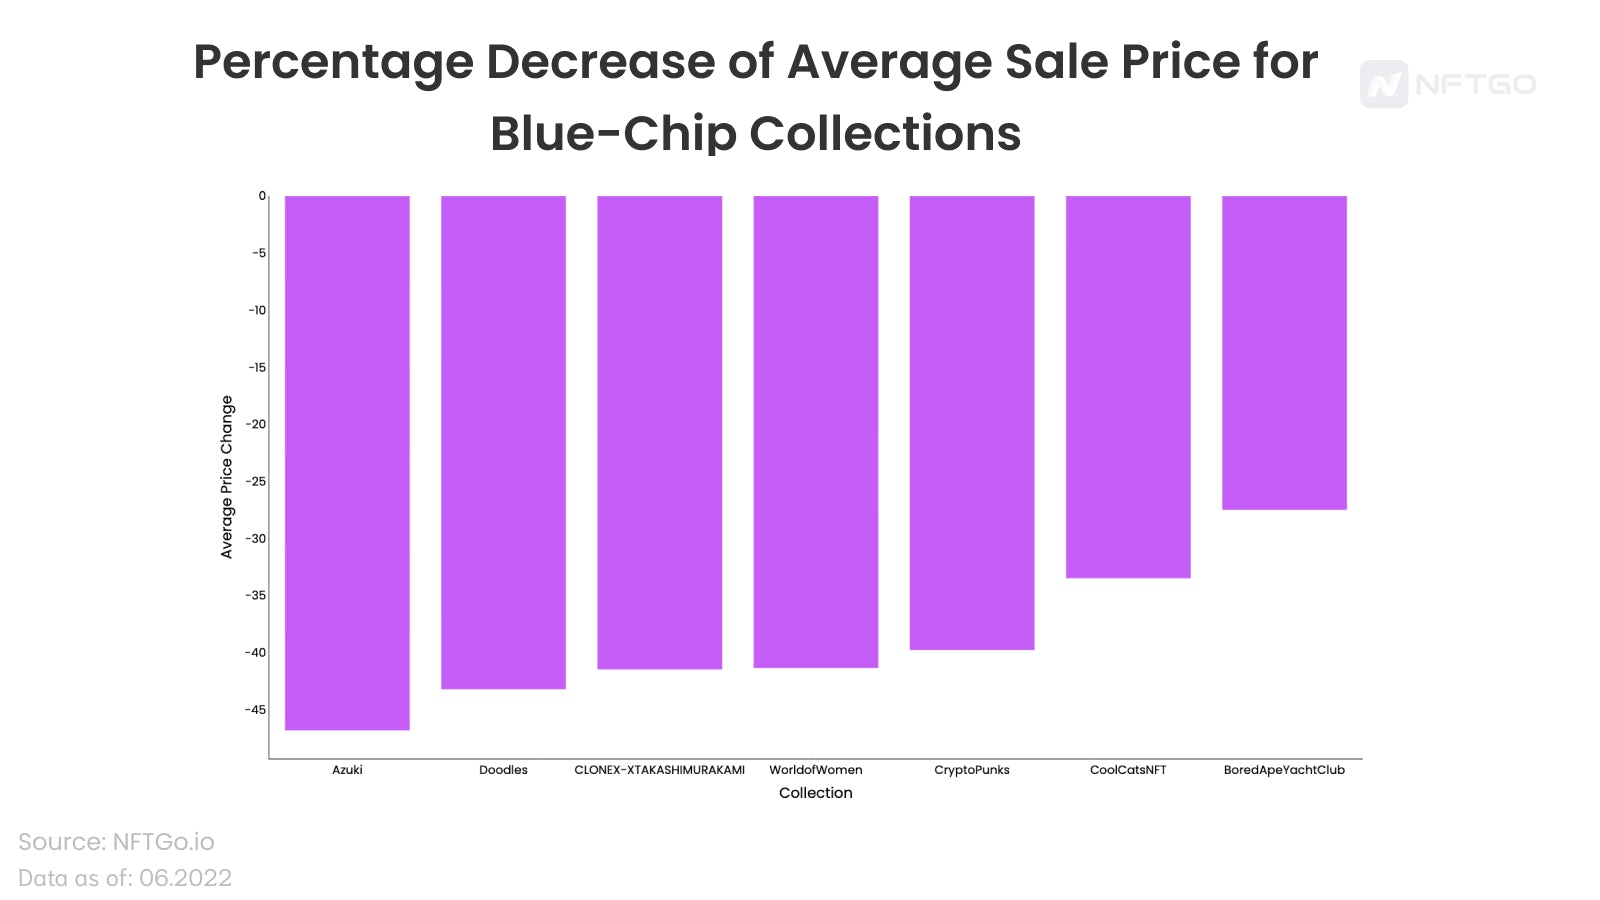 Percentage Decrease of Average Sale Price for Blue-Chip Collections